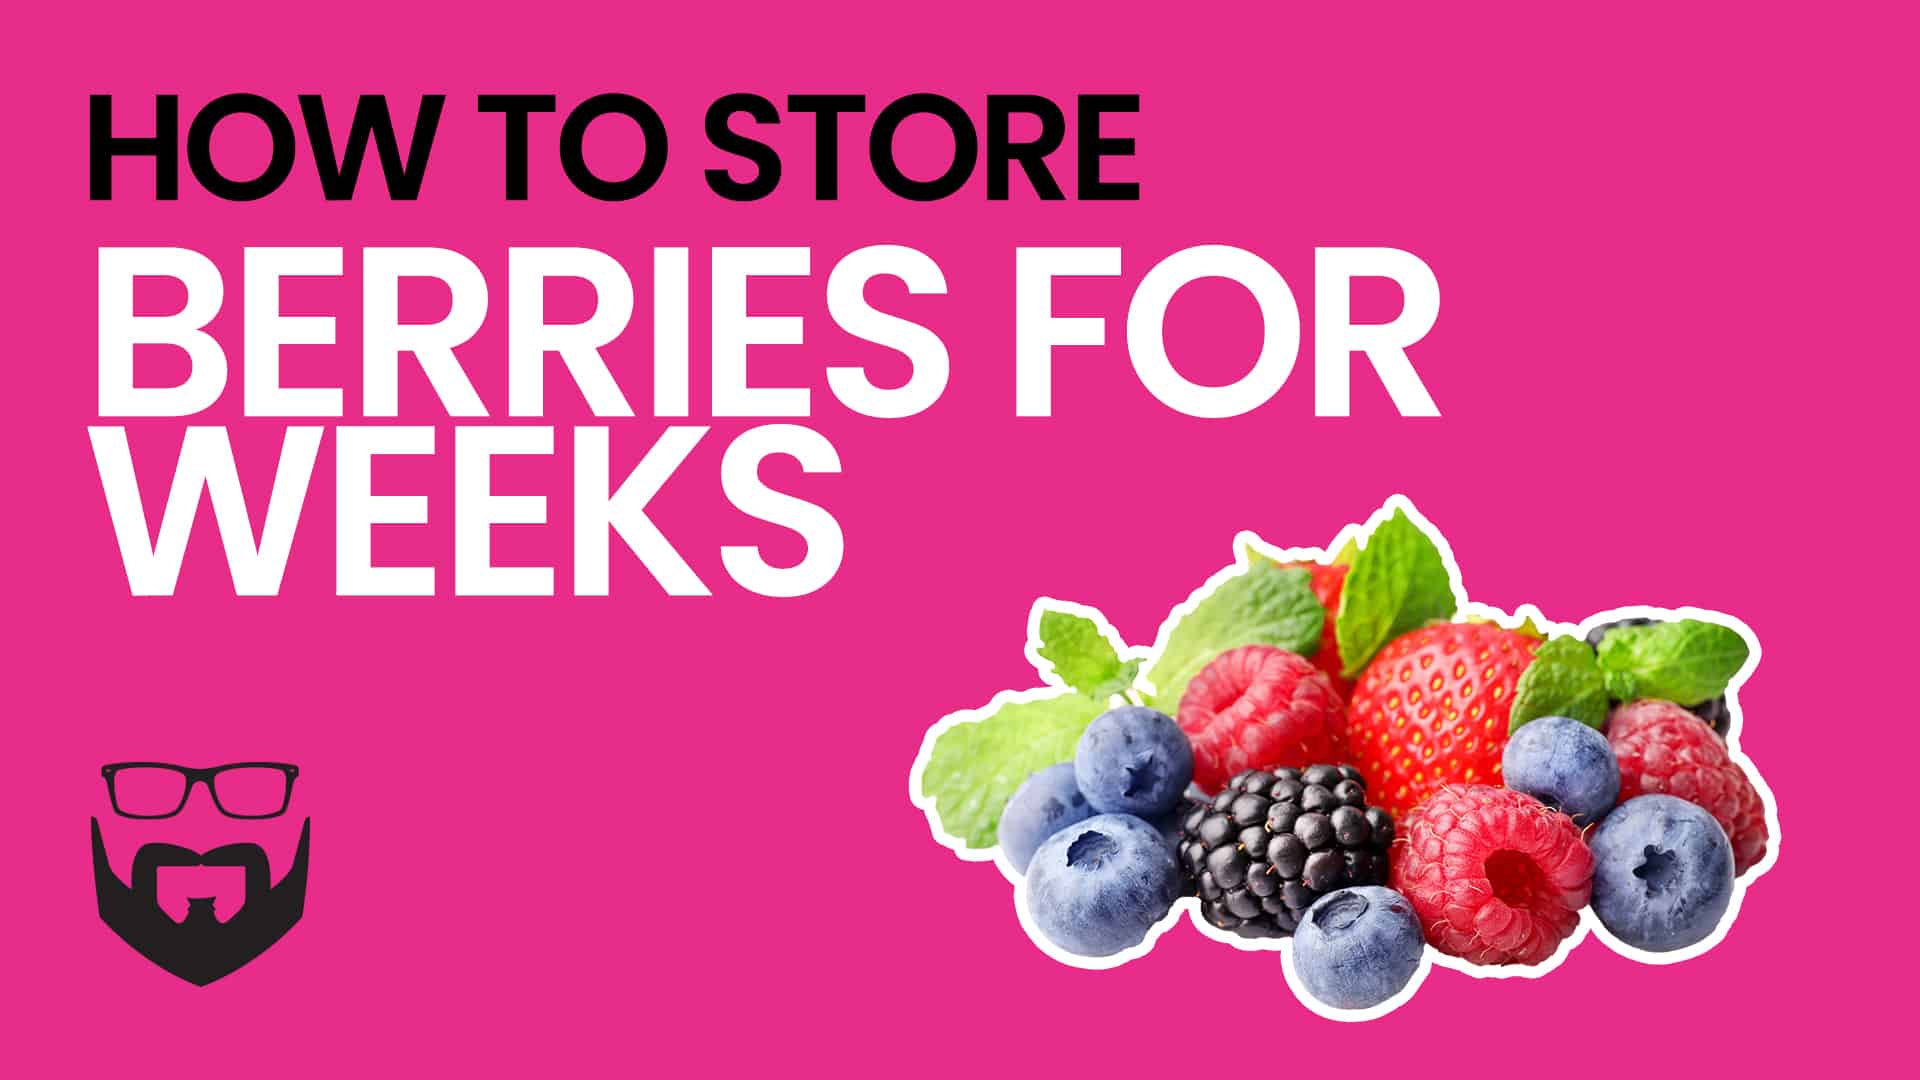 How to Store Berries for Weeks Video - Pink